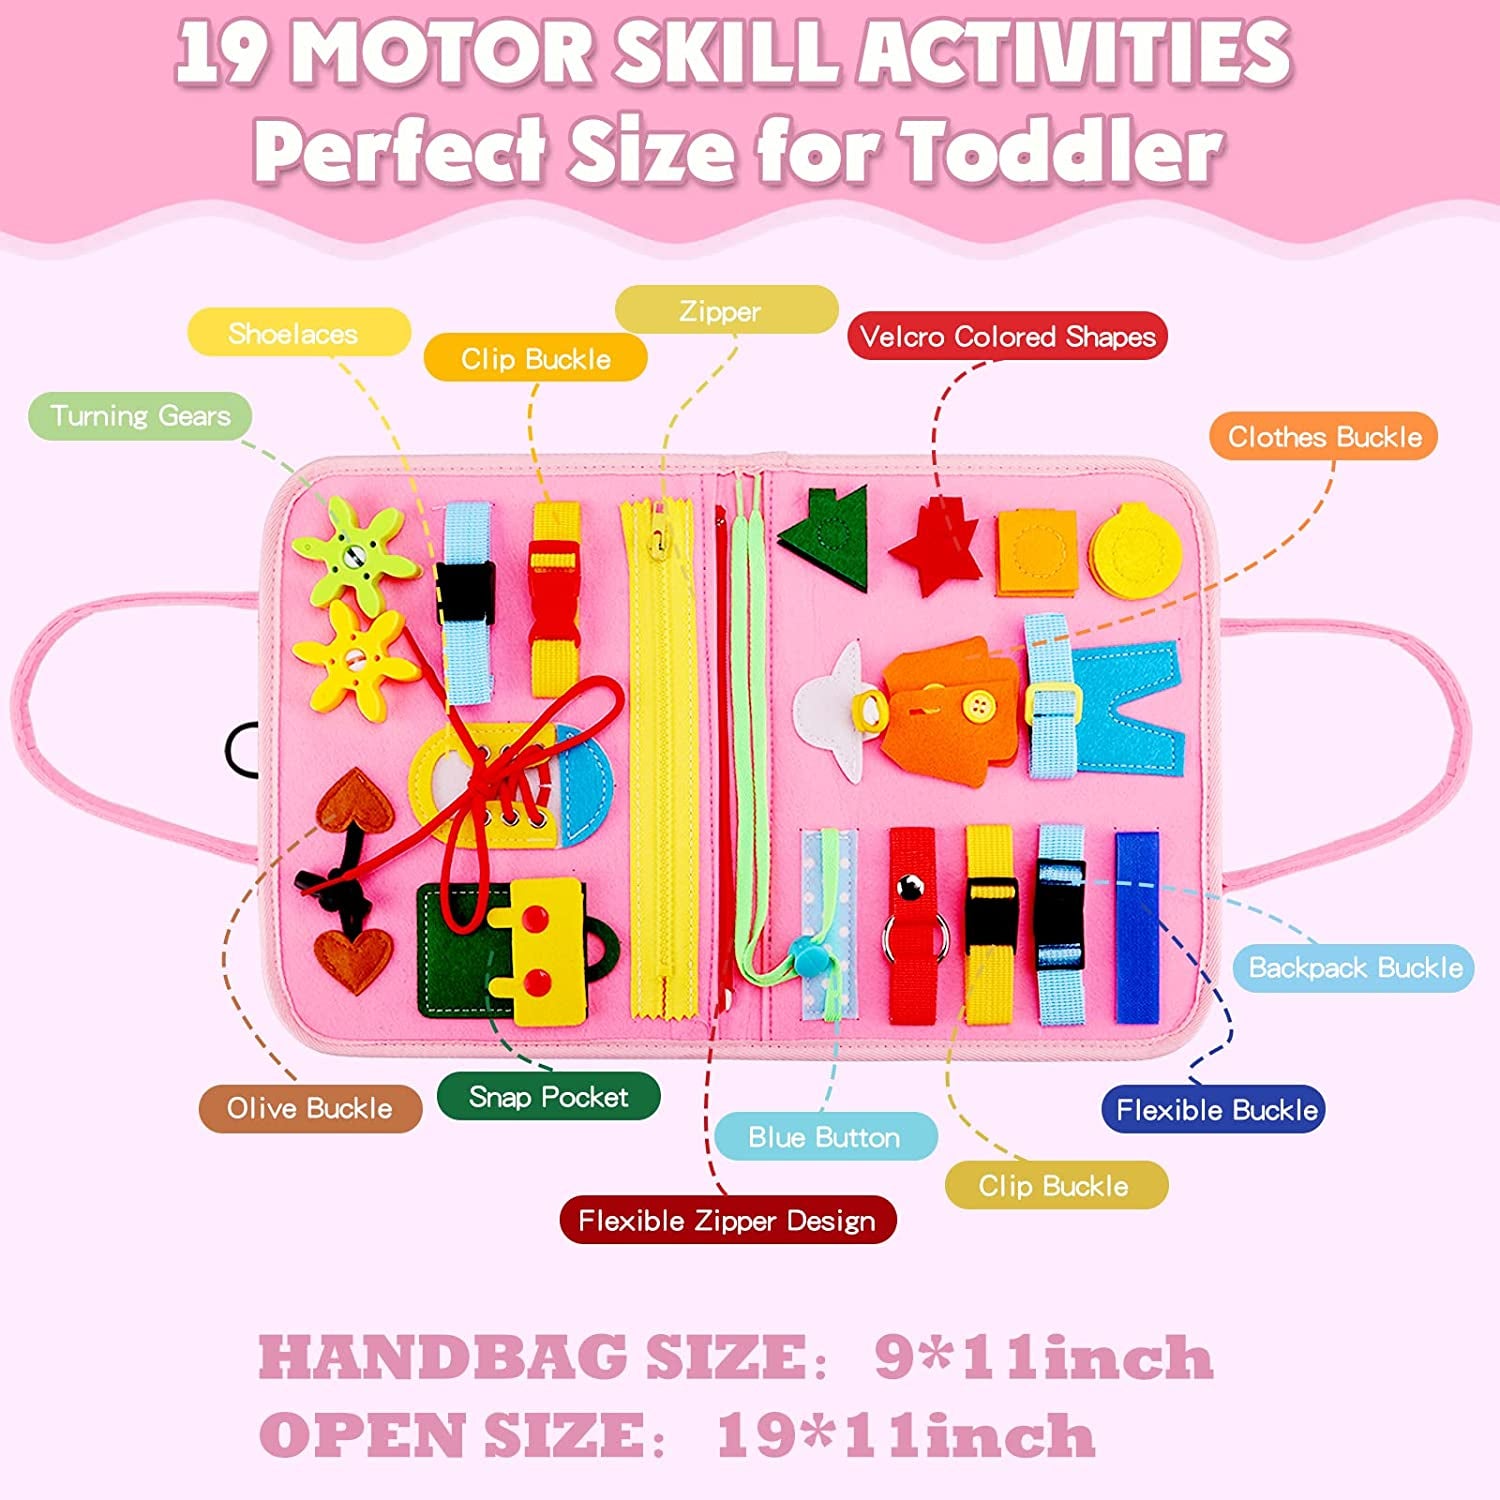 Busy Board Montessori Toy for 1 2 3 4 Year Old Toddlers - Educational Activity Developing Sensory Board for Basic Dress Fine Motor Skills - Travel Toys for Plane Car, Gift for Boys Girls